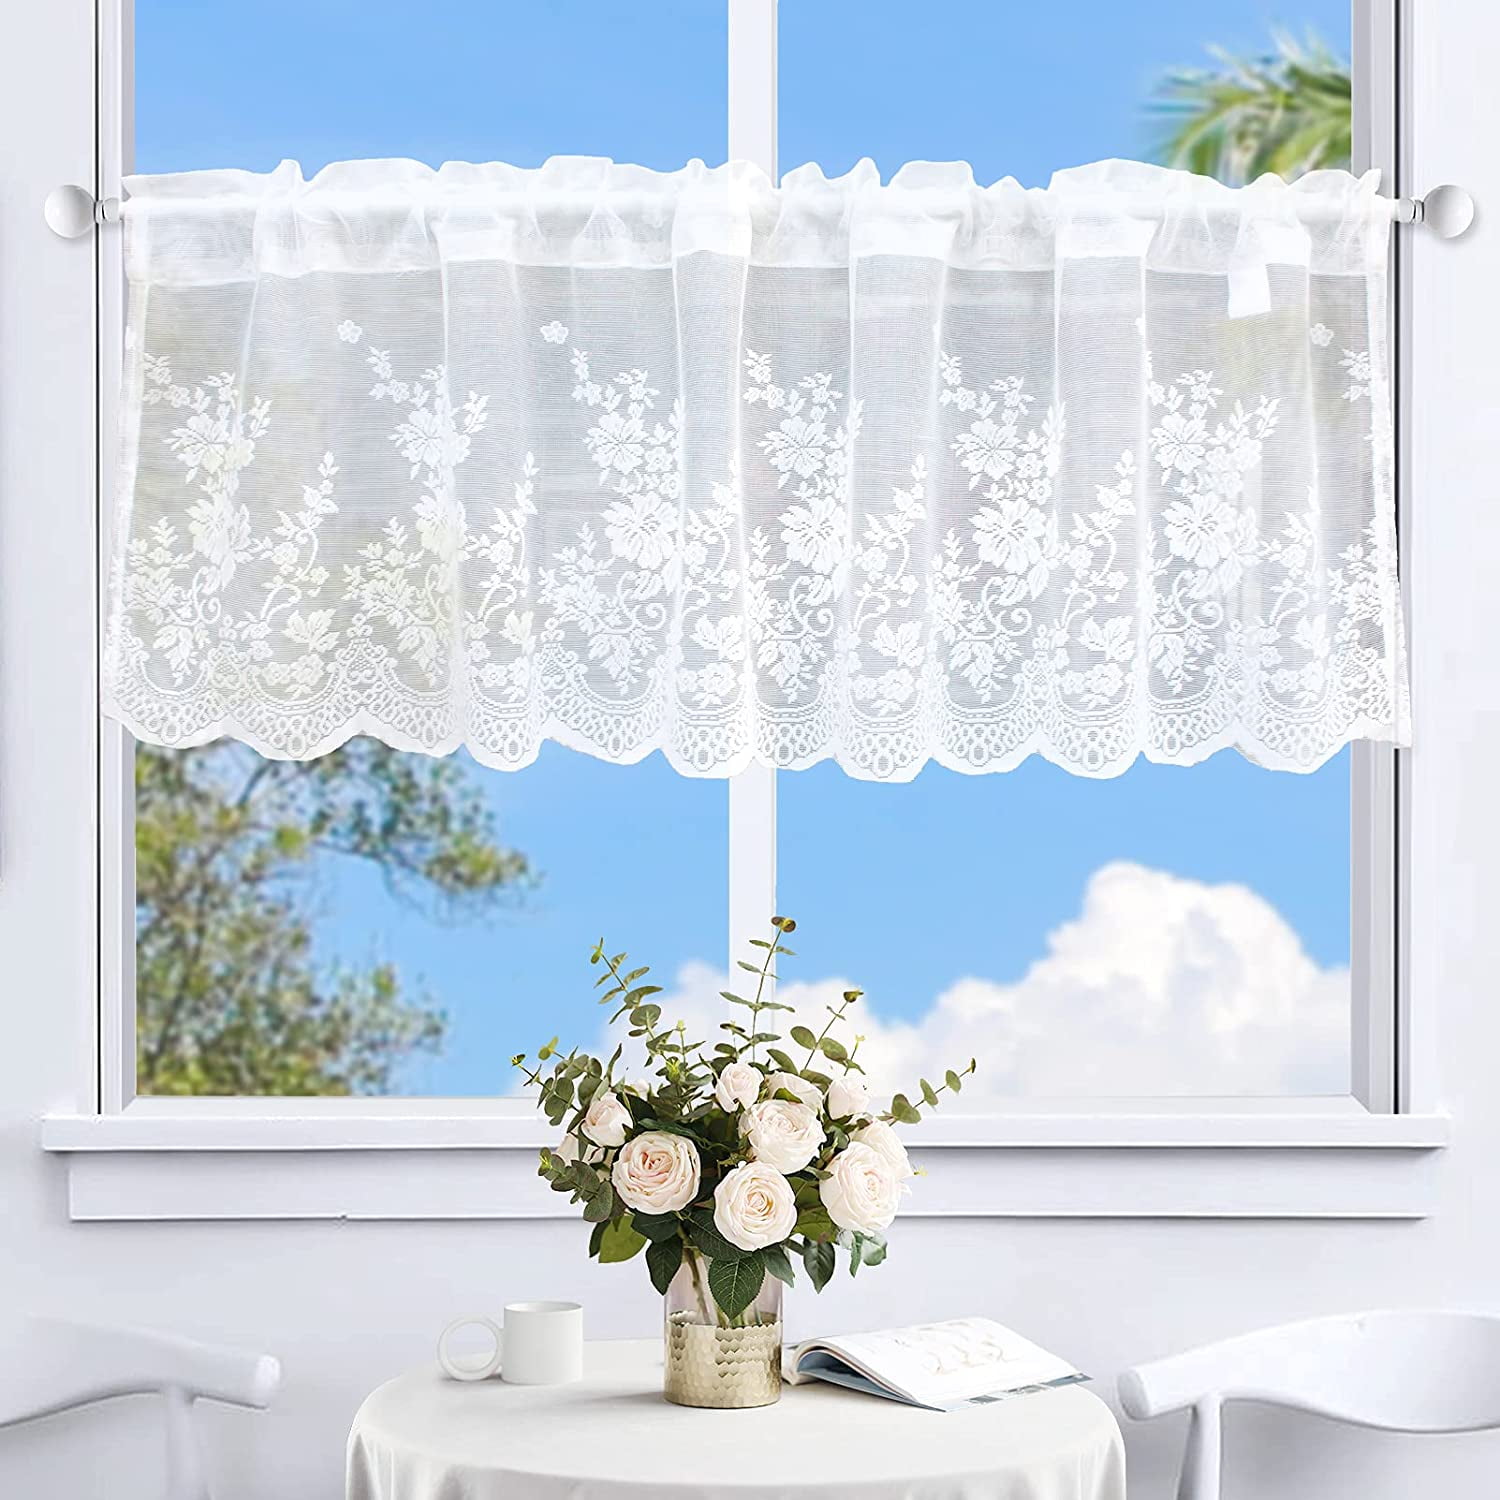 white great Embroidered Home decorate Kitchen Lace Sheer Cafe white Curtain 